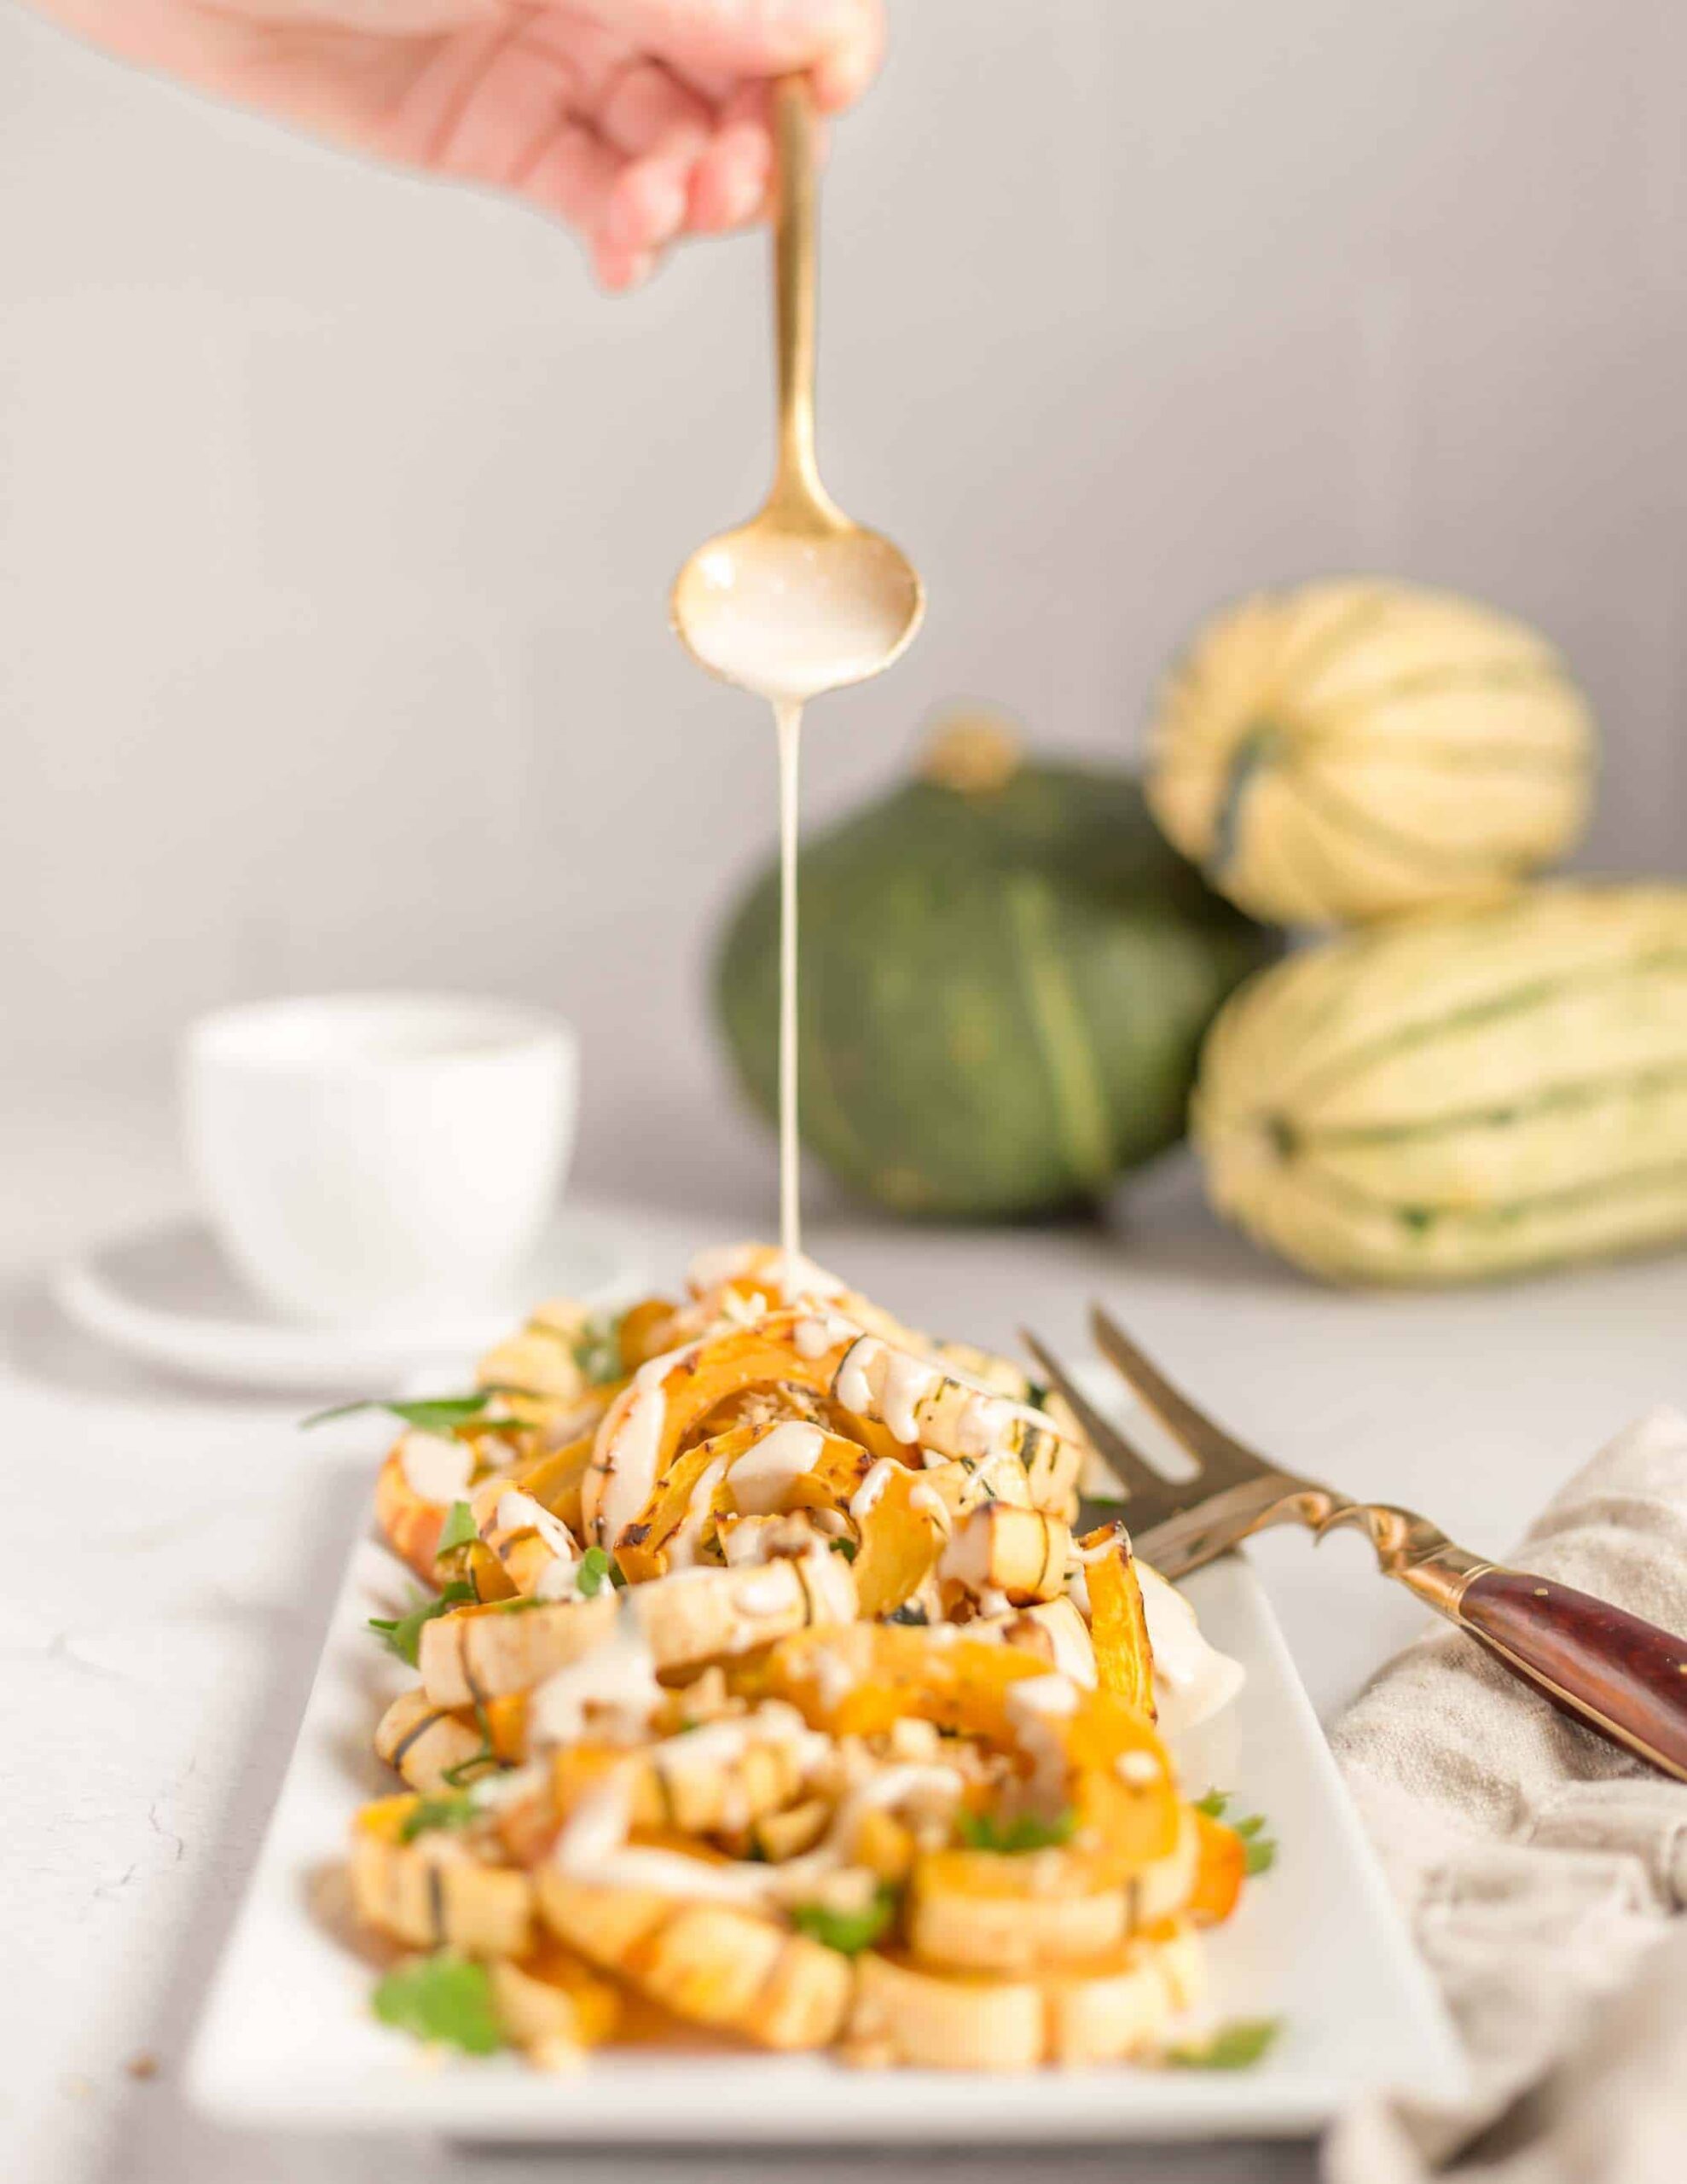 Best Roasted Roasted Delicata Squash Recipe With Tahini Drizzle